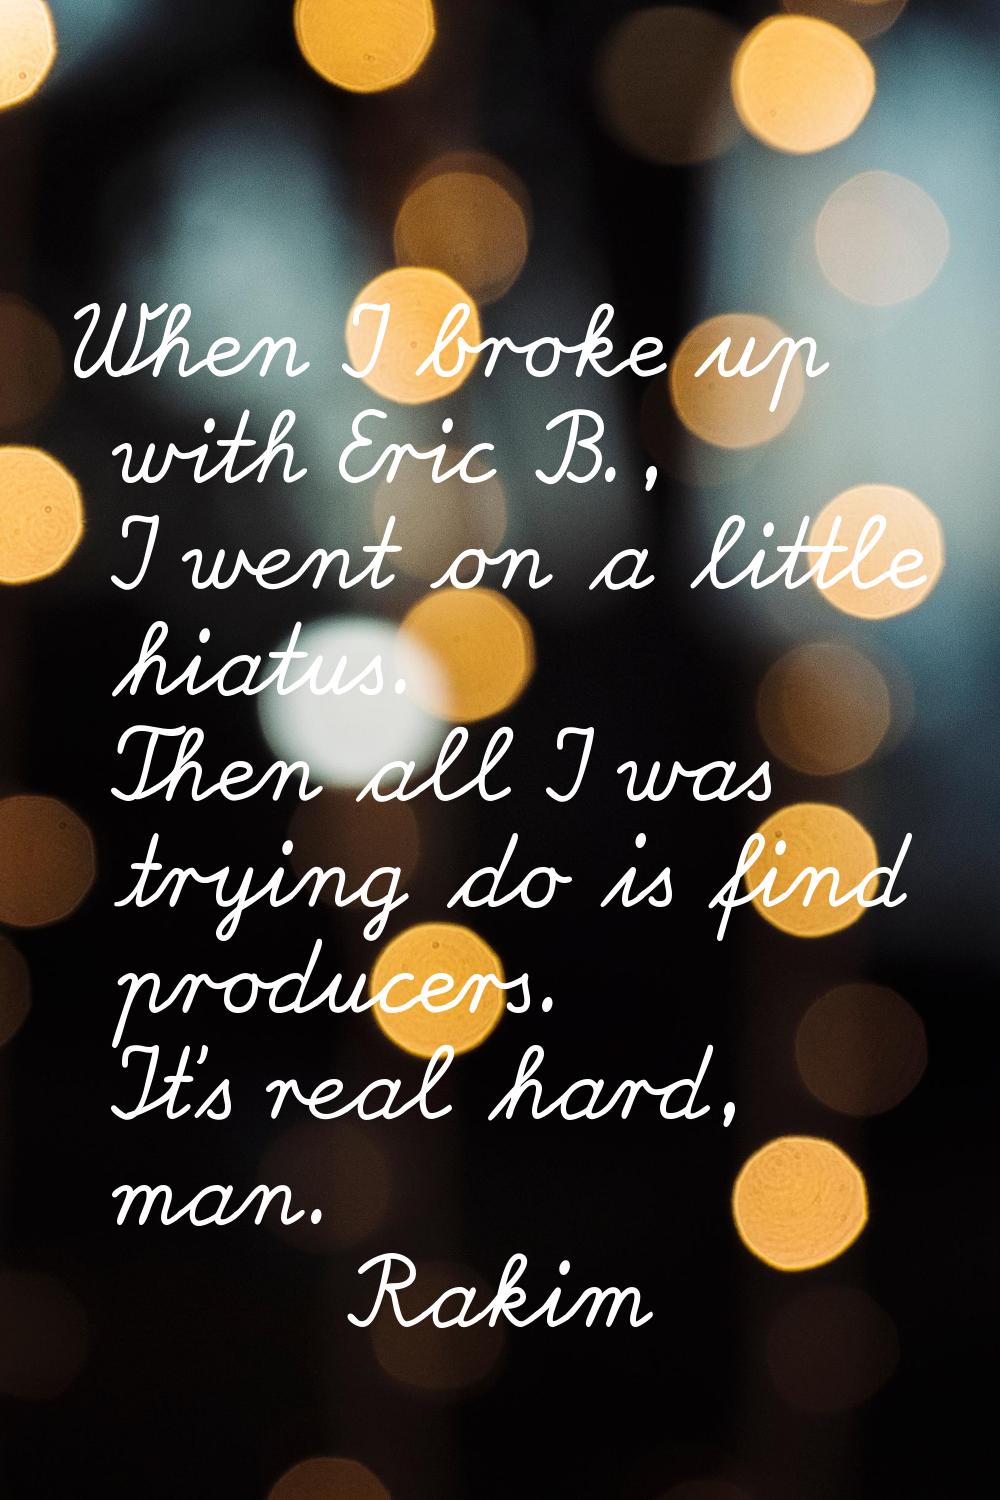 When I broke up with Eric B., I went on a little hiatus. Then all I was trying do is find producers